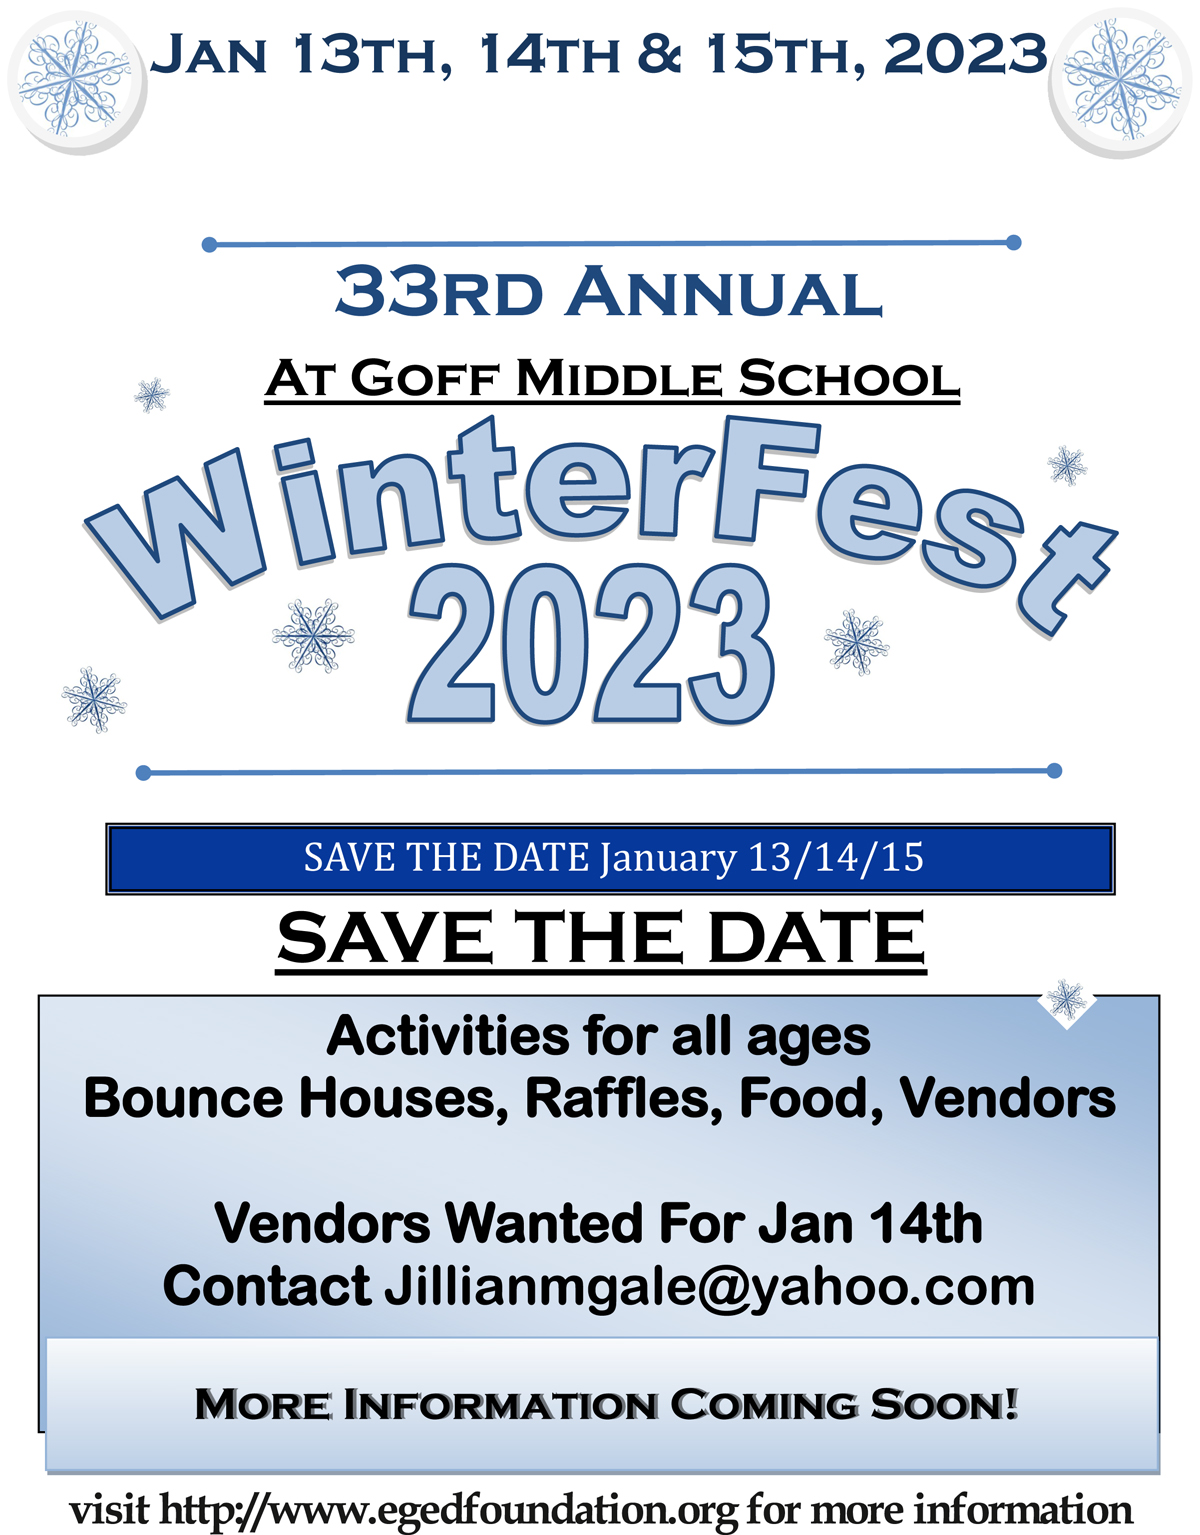 WinterFest 2023 Save the Date flyer